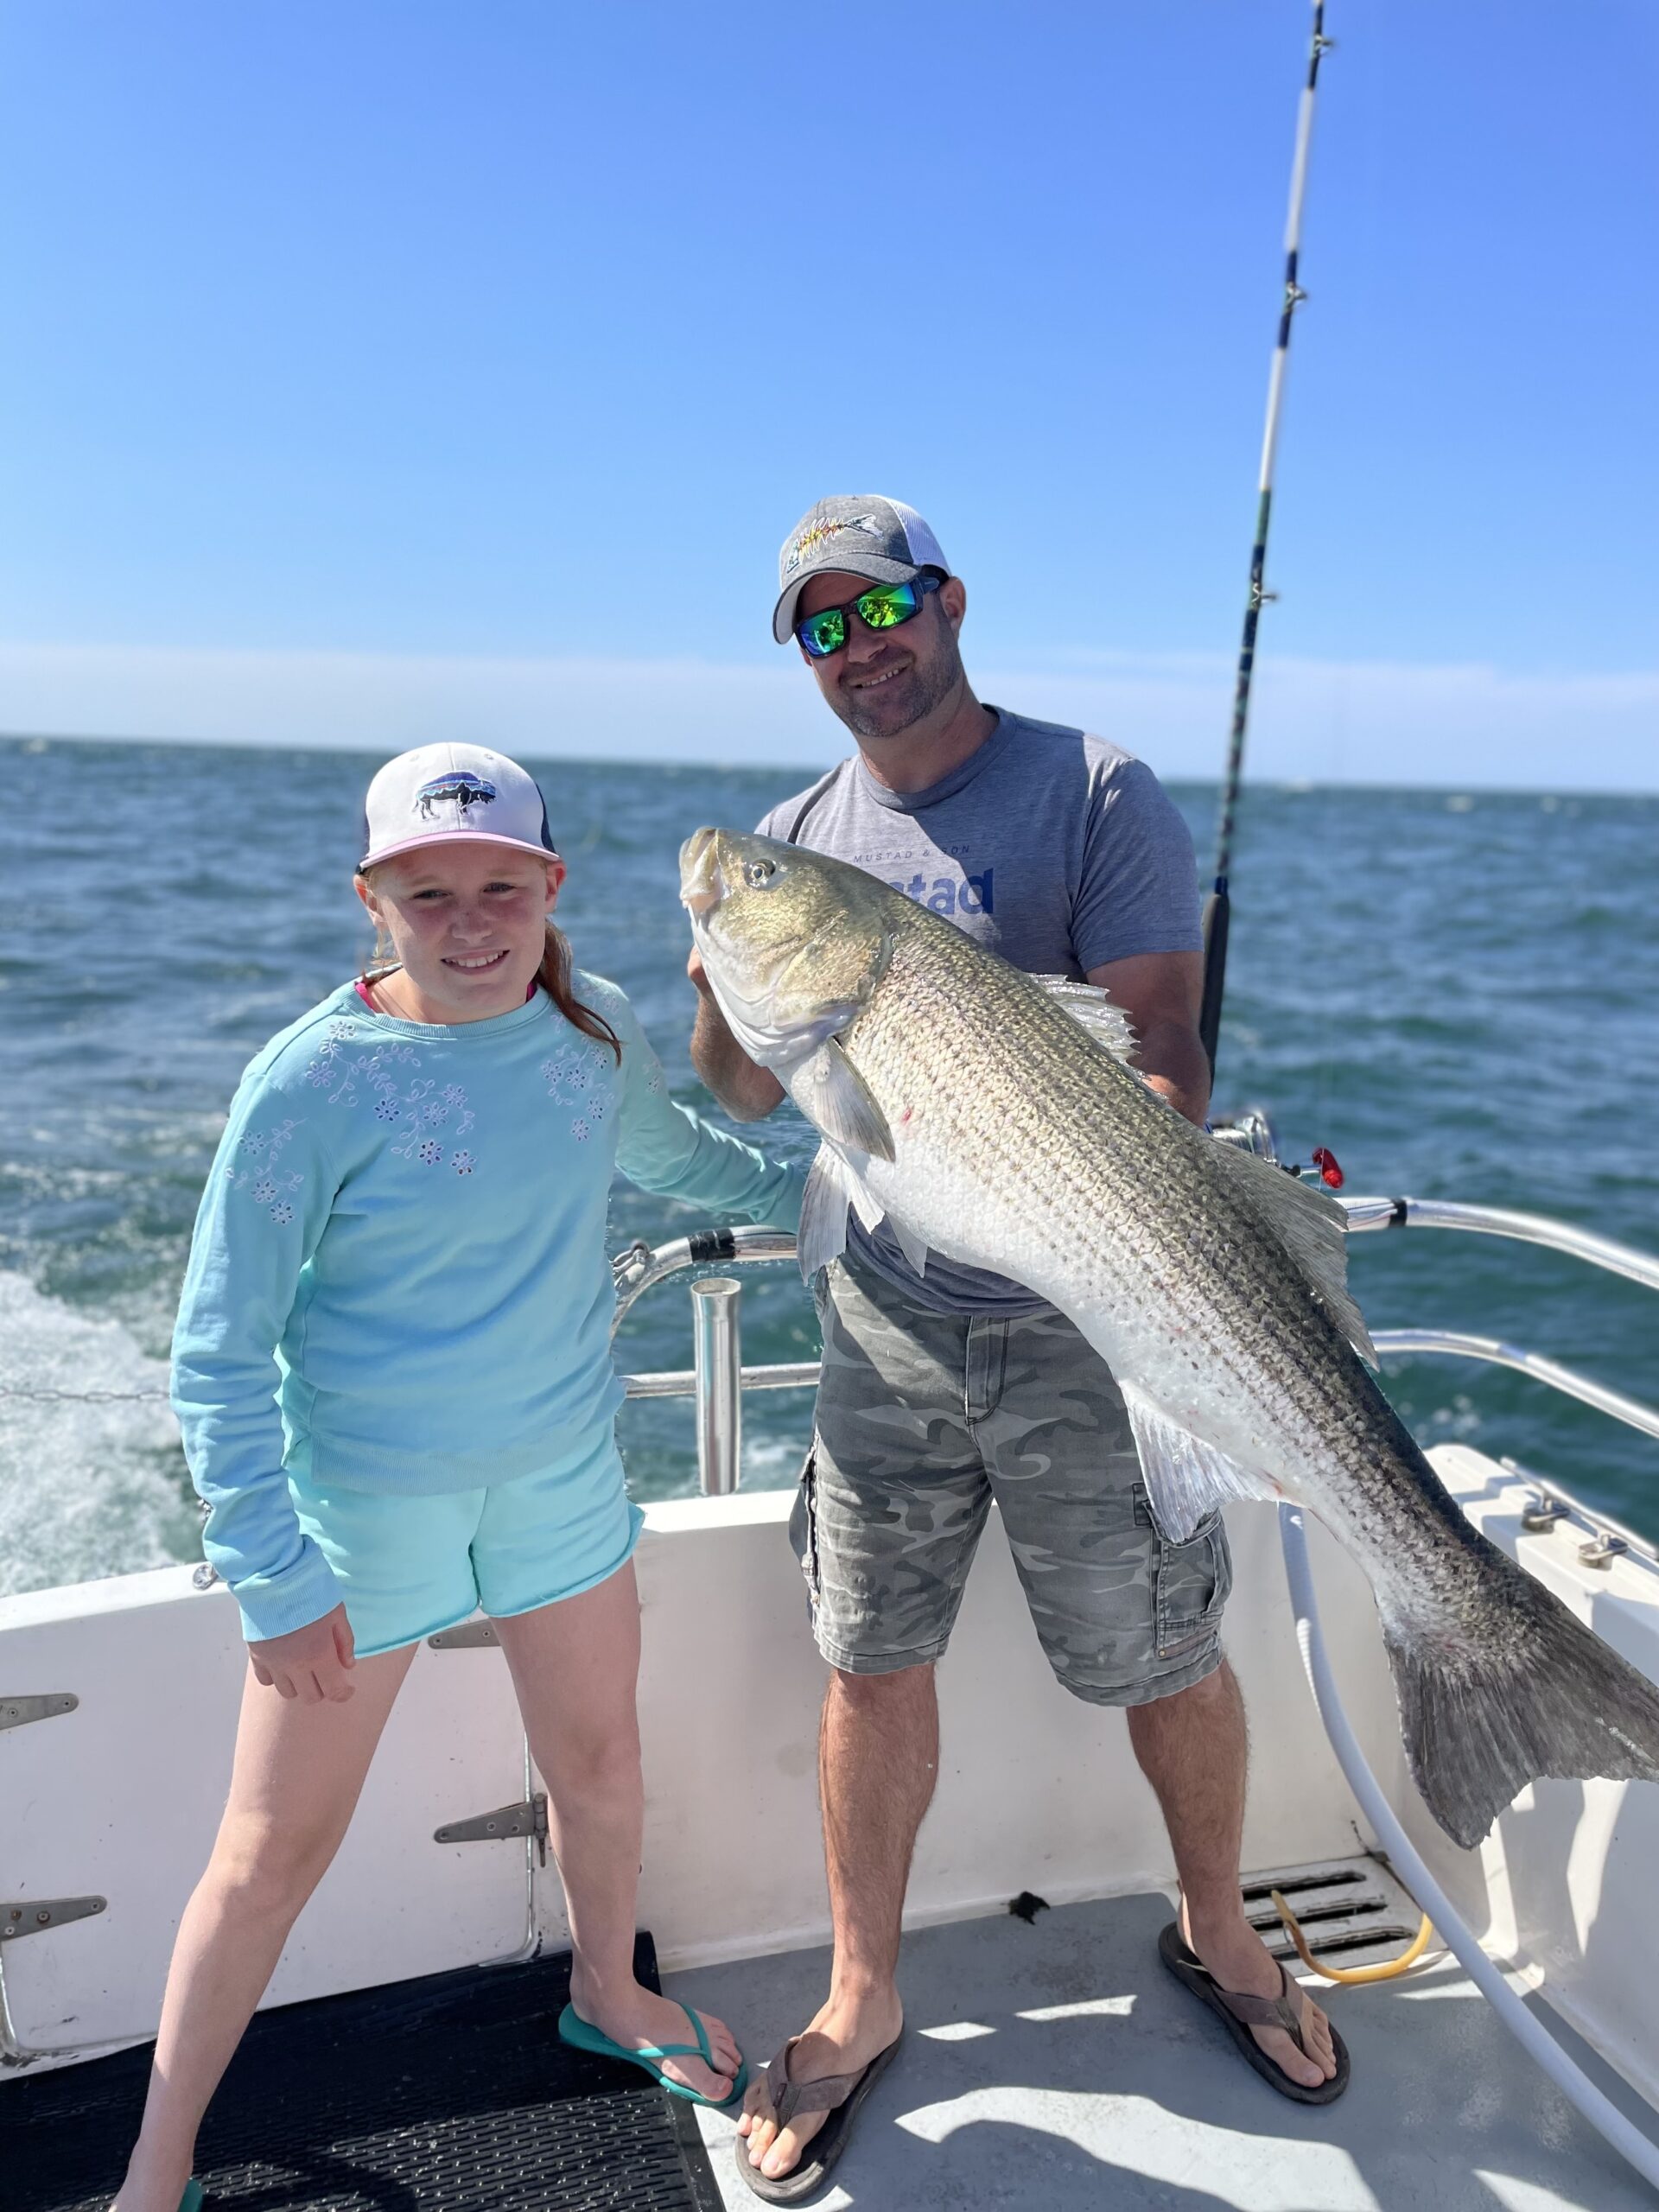 Eloise Hawtin gets a hand from Capt. Dan Giunta showing off a big striped bass she caught while fishing aboard Giunta's charter boat Double D off Montauk recently.